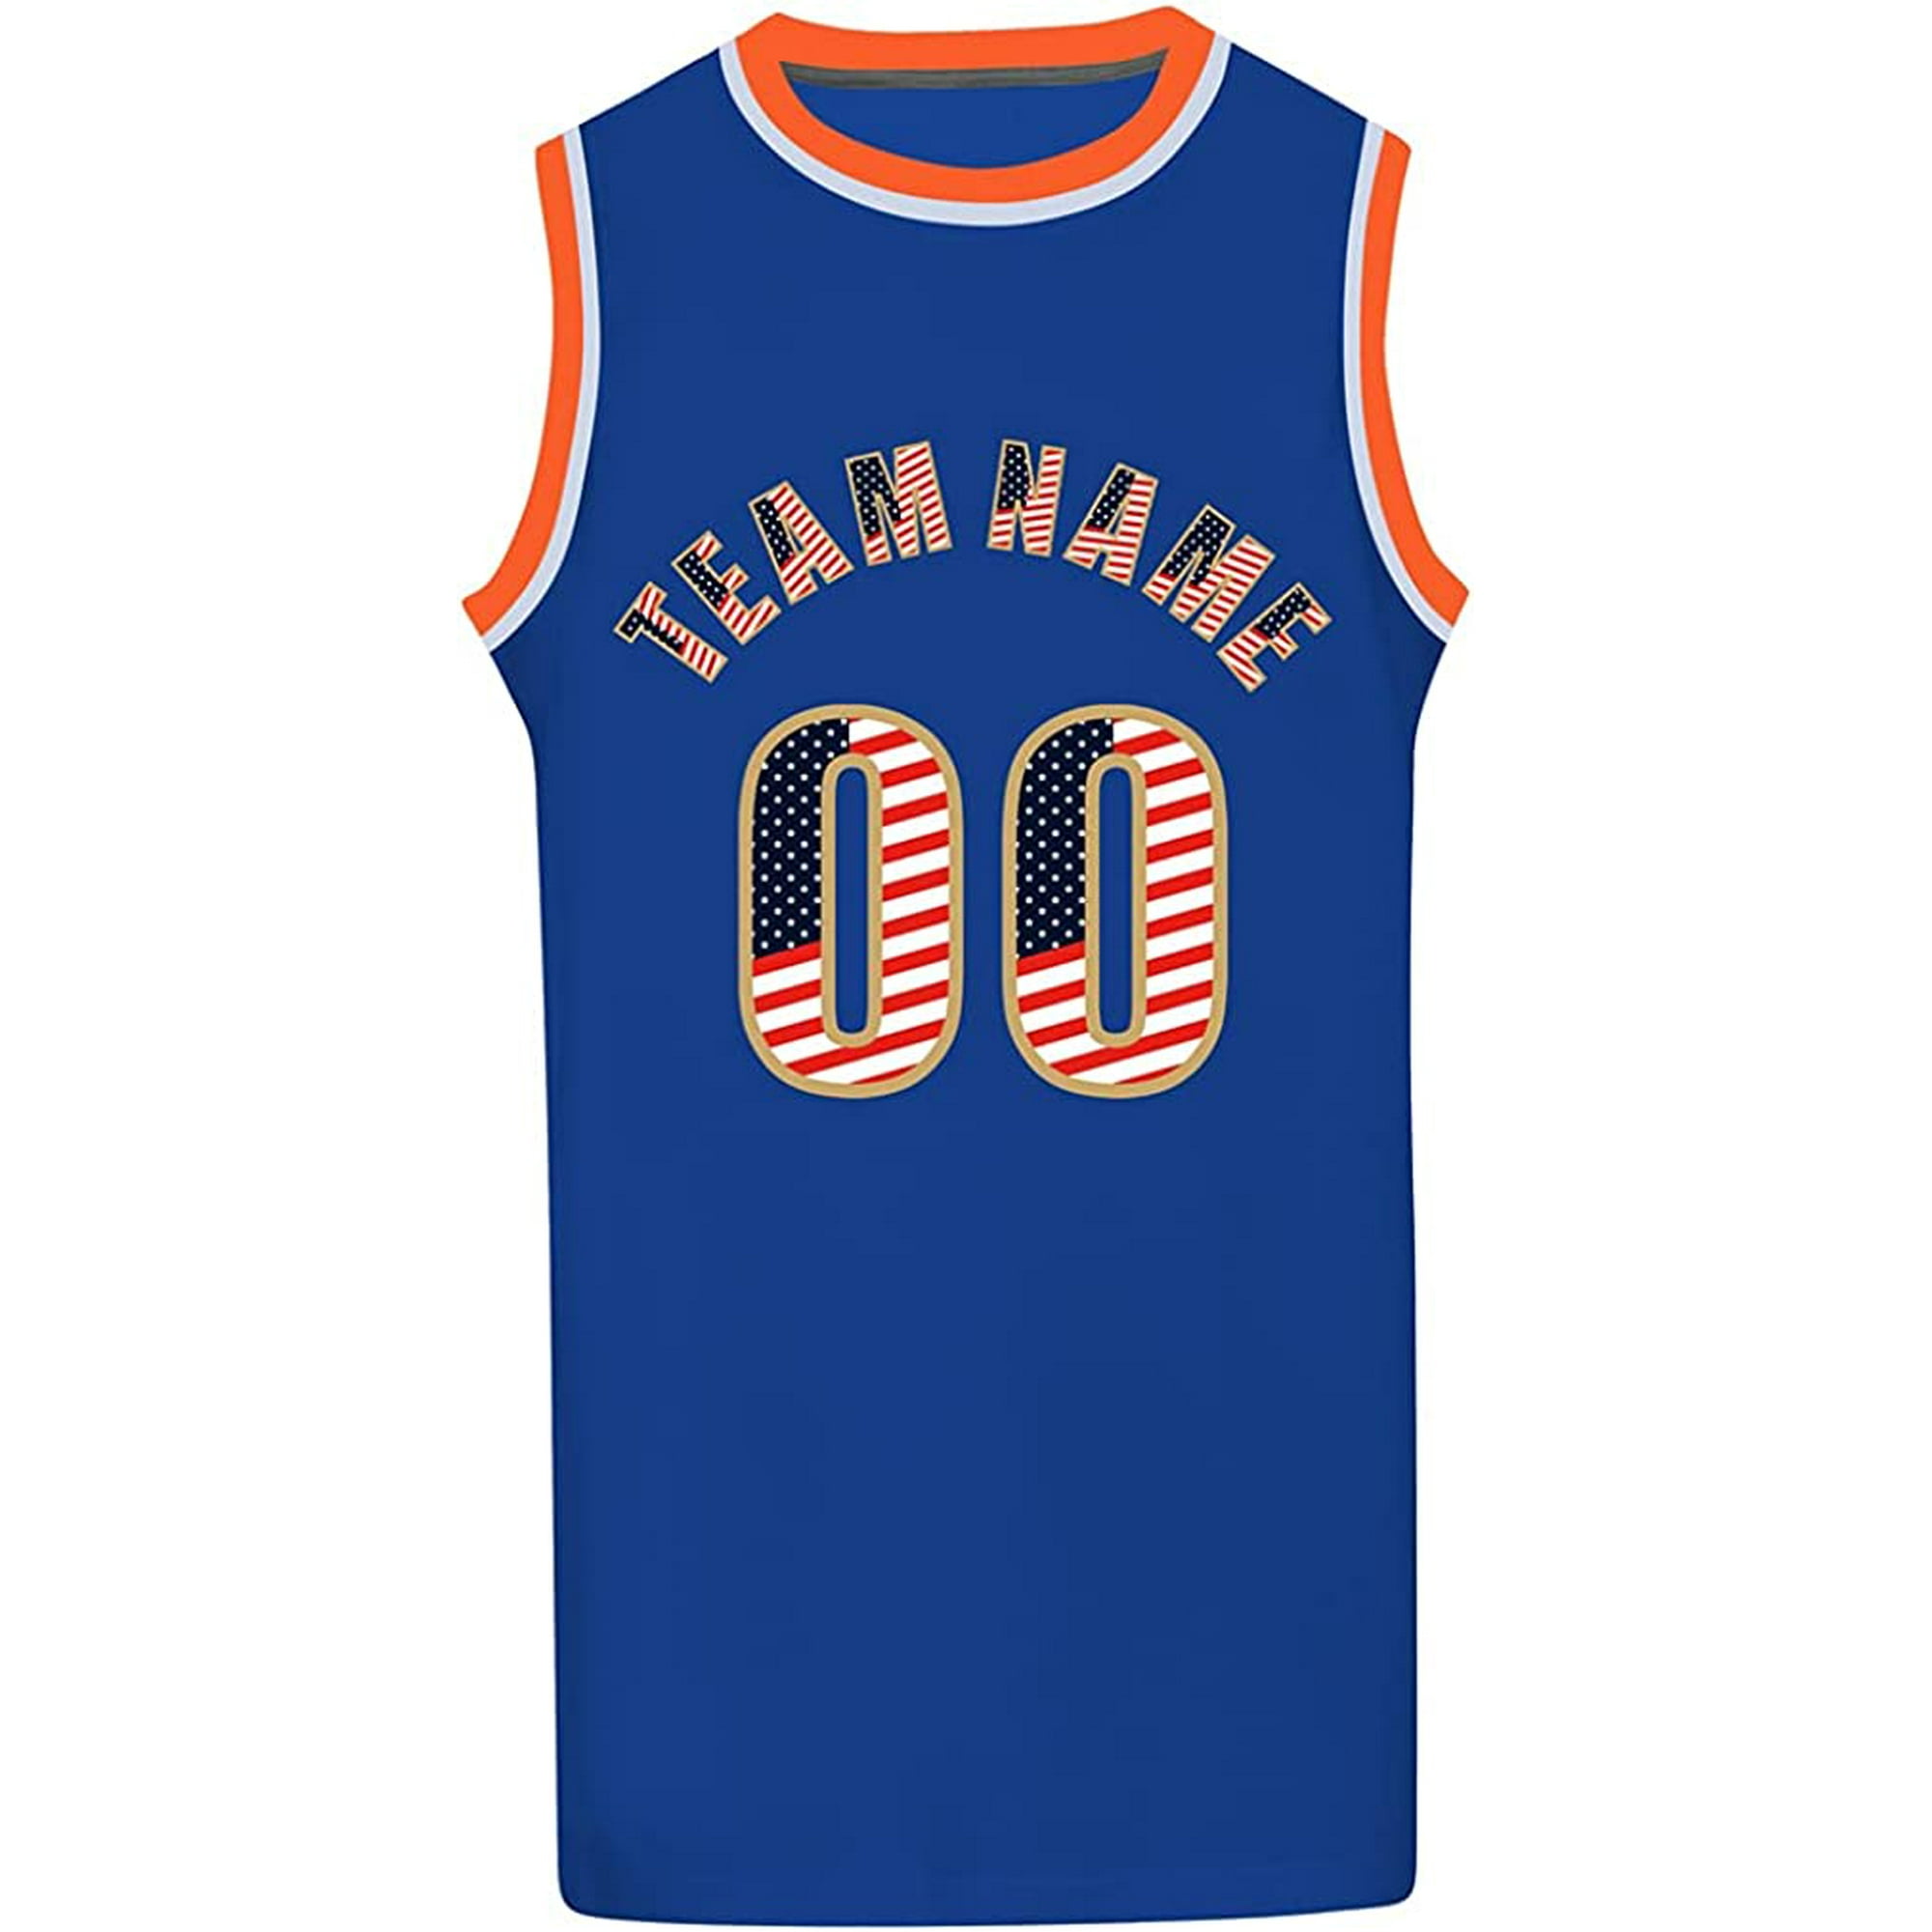 Custom Round Neck Basketball Jersey for Men/Women/Youth Make Your Own  Personalized Team Uniforms 